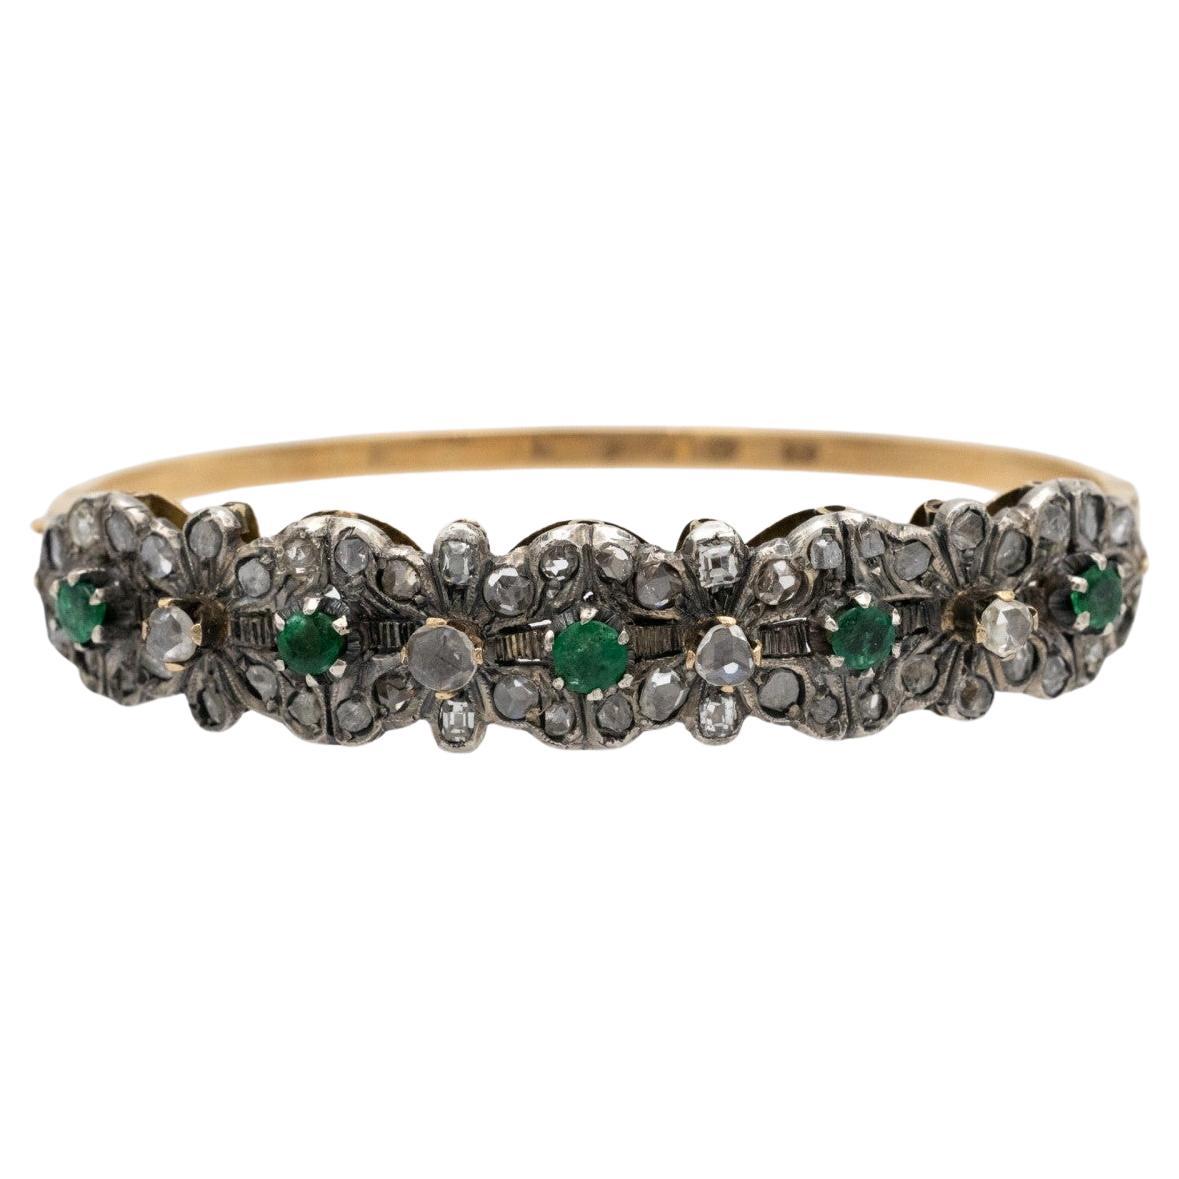 Art Nouveau bracelet with diamonds and emeralds, Russia, late 19th century. For Sale